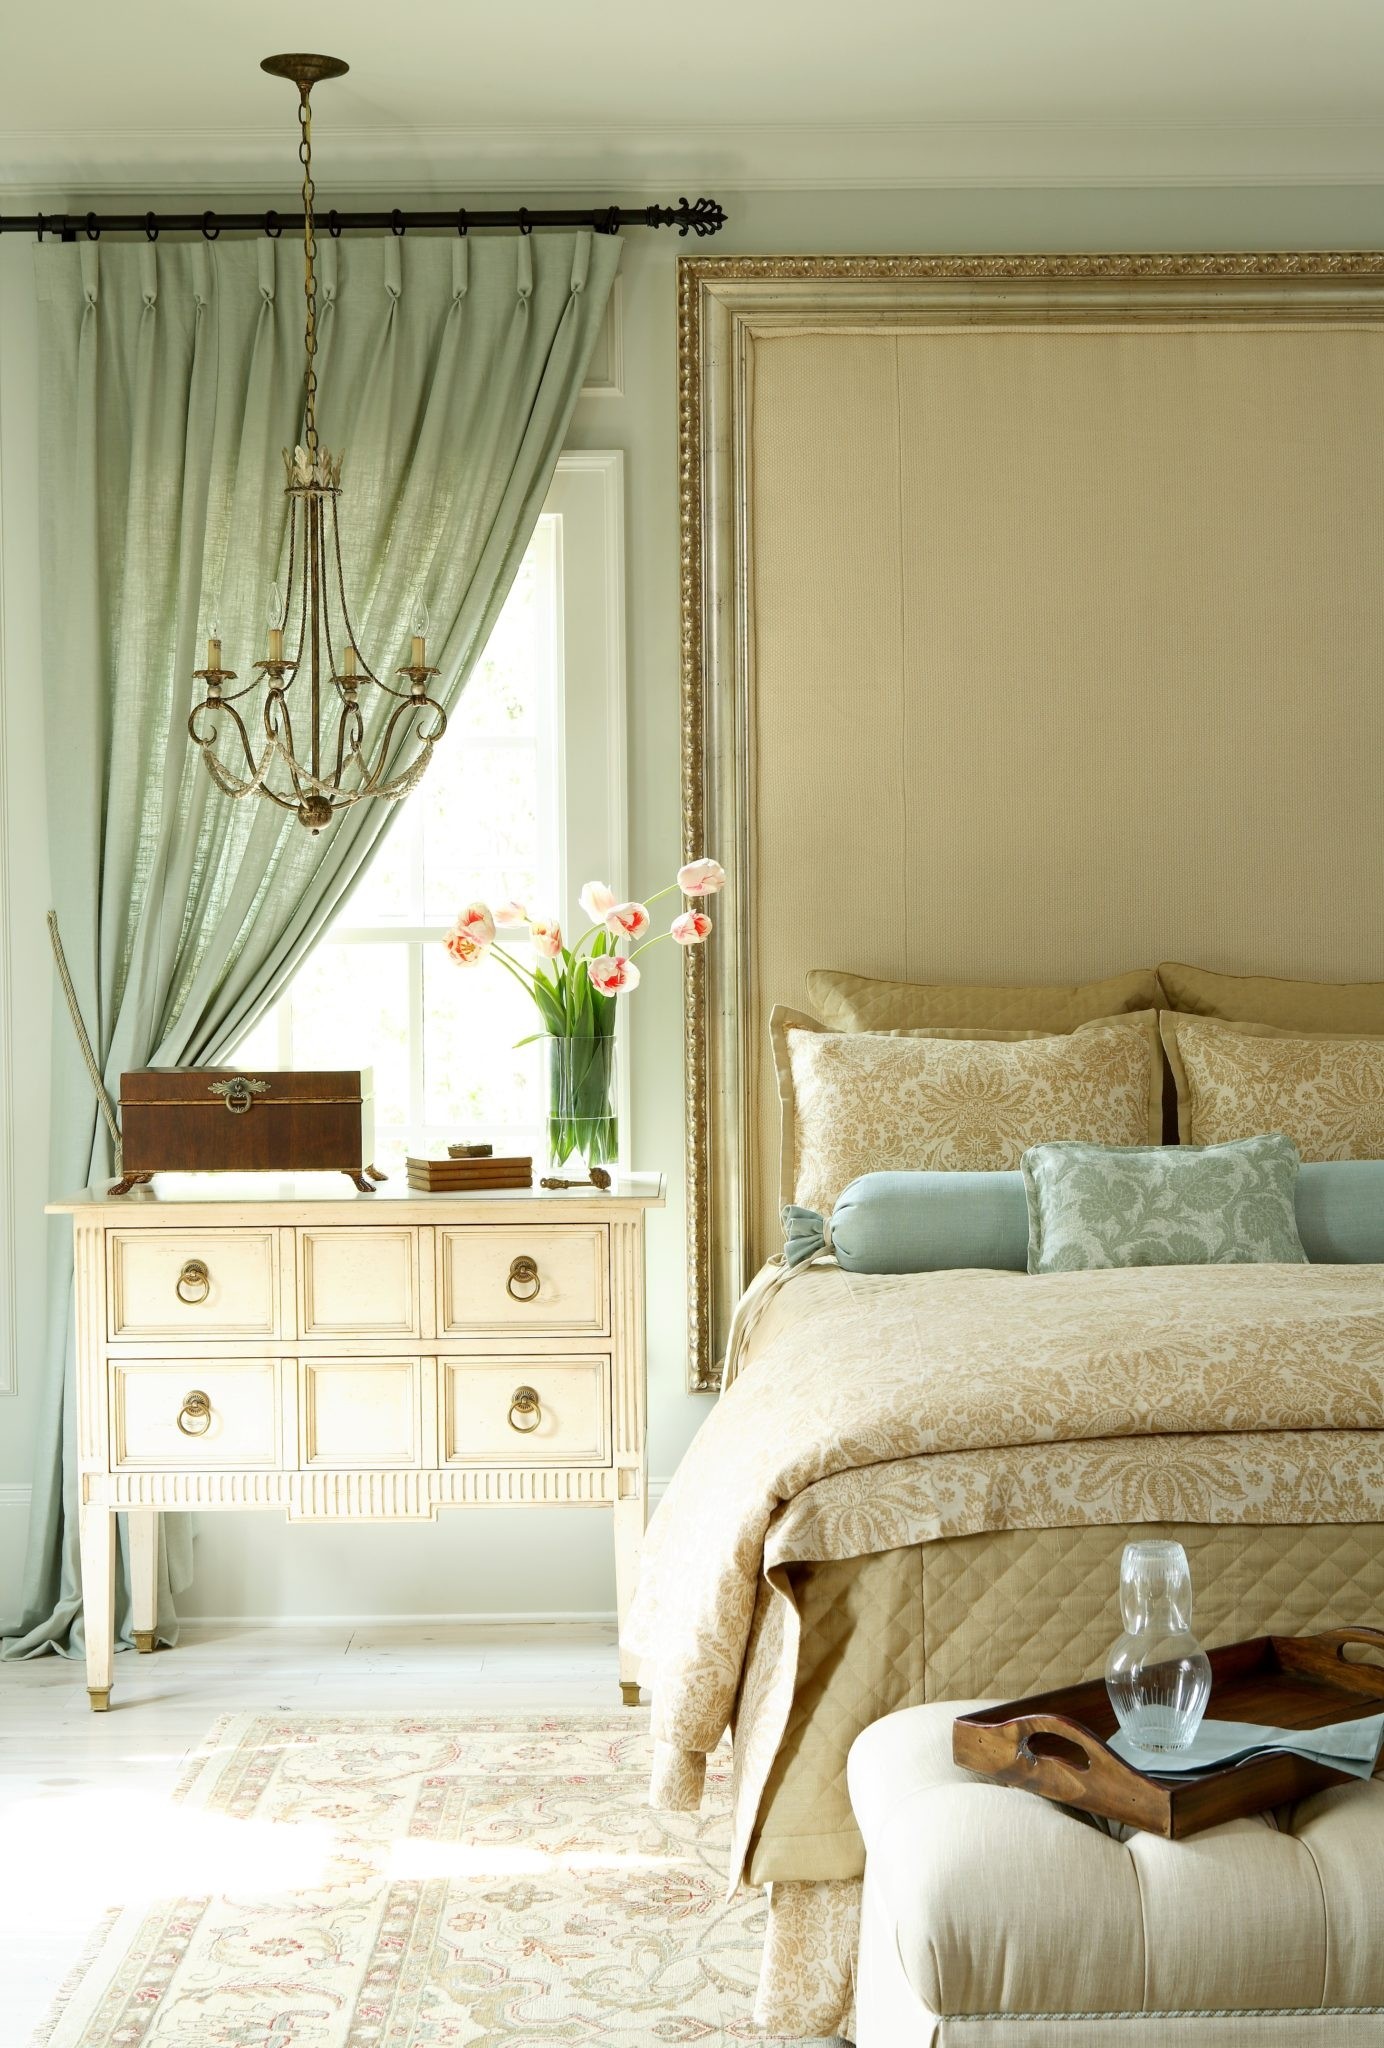 I love everything about this elegant bedroom especially the grand